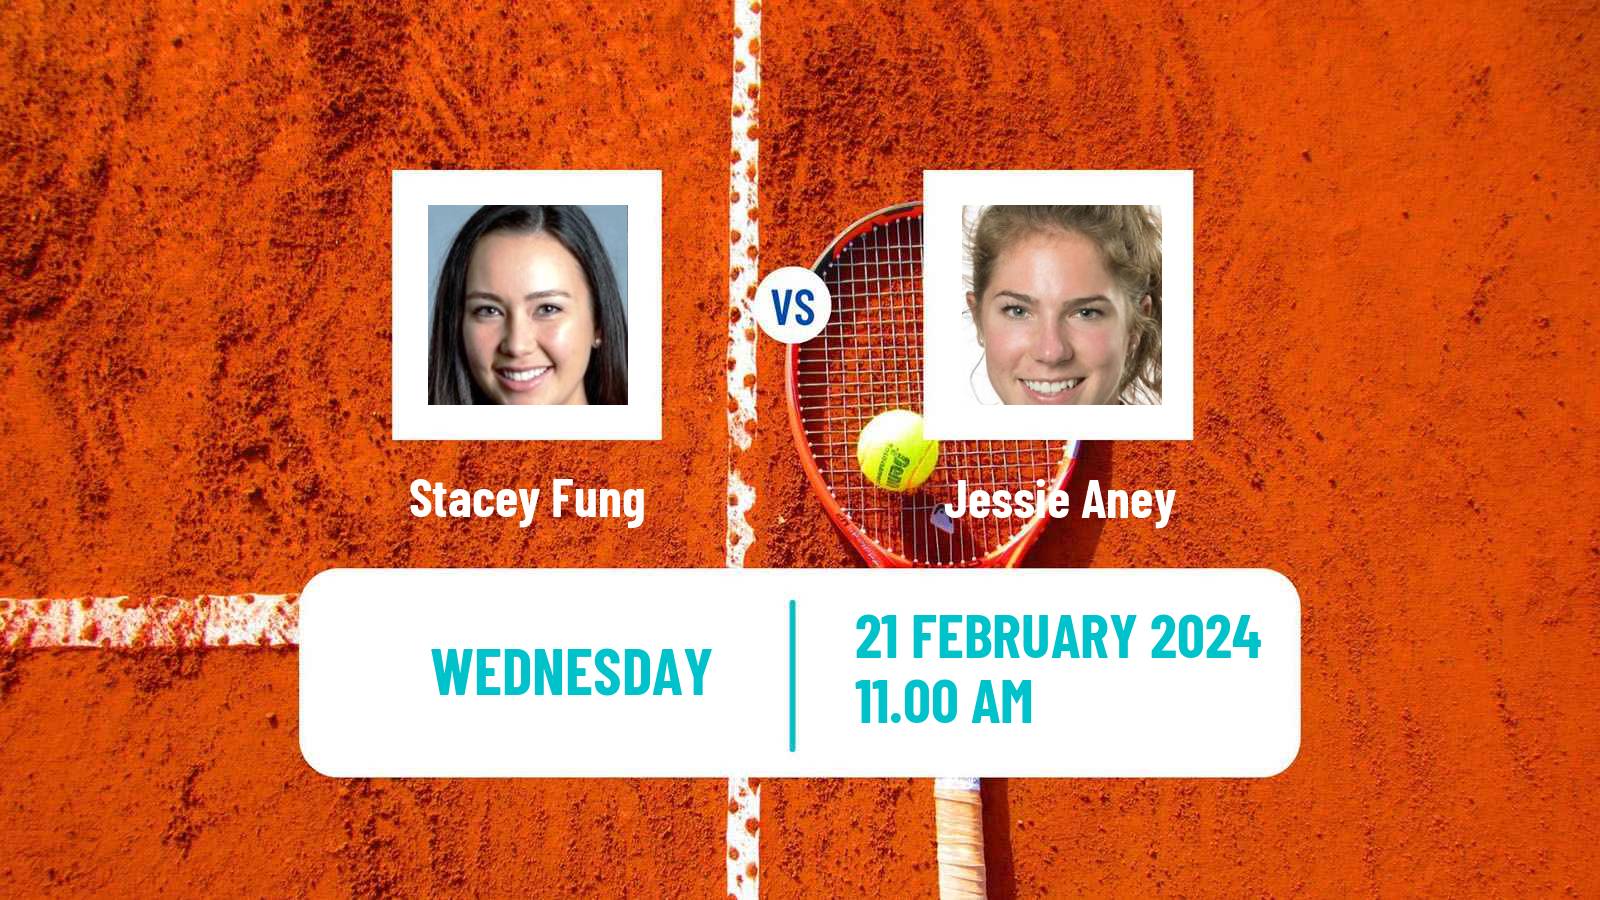 Tennis ITF W50 Mexico City Women Stacey Fung - Jessie Aney